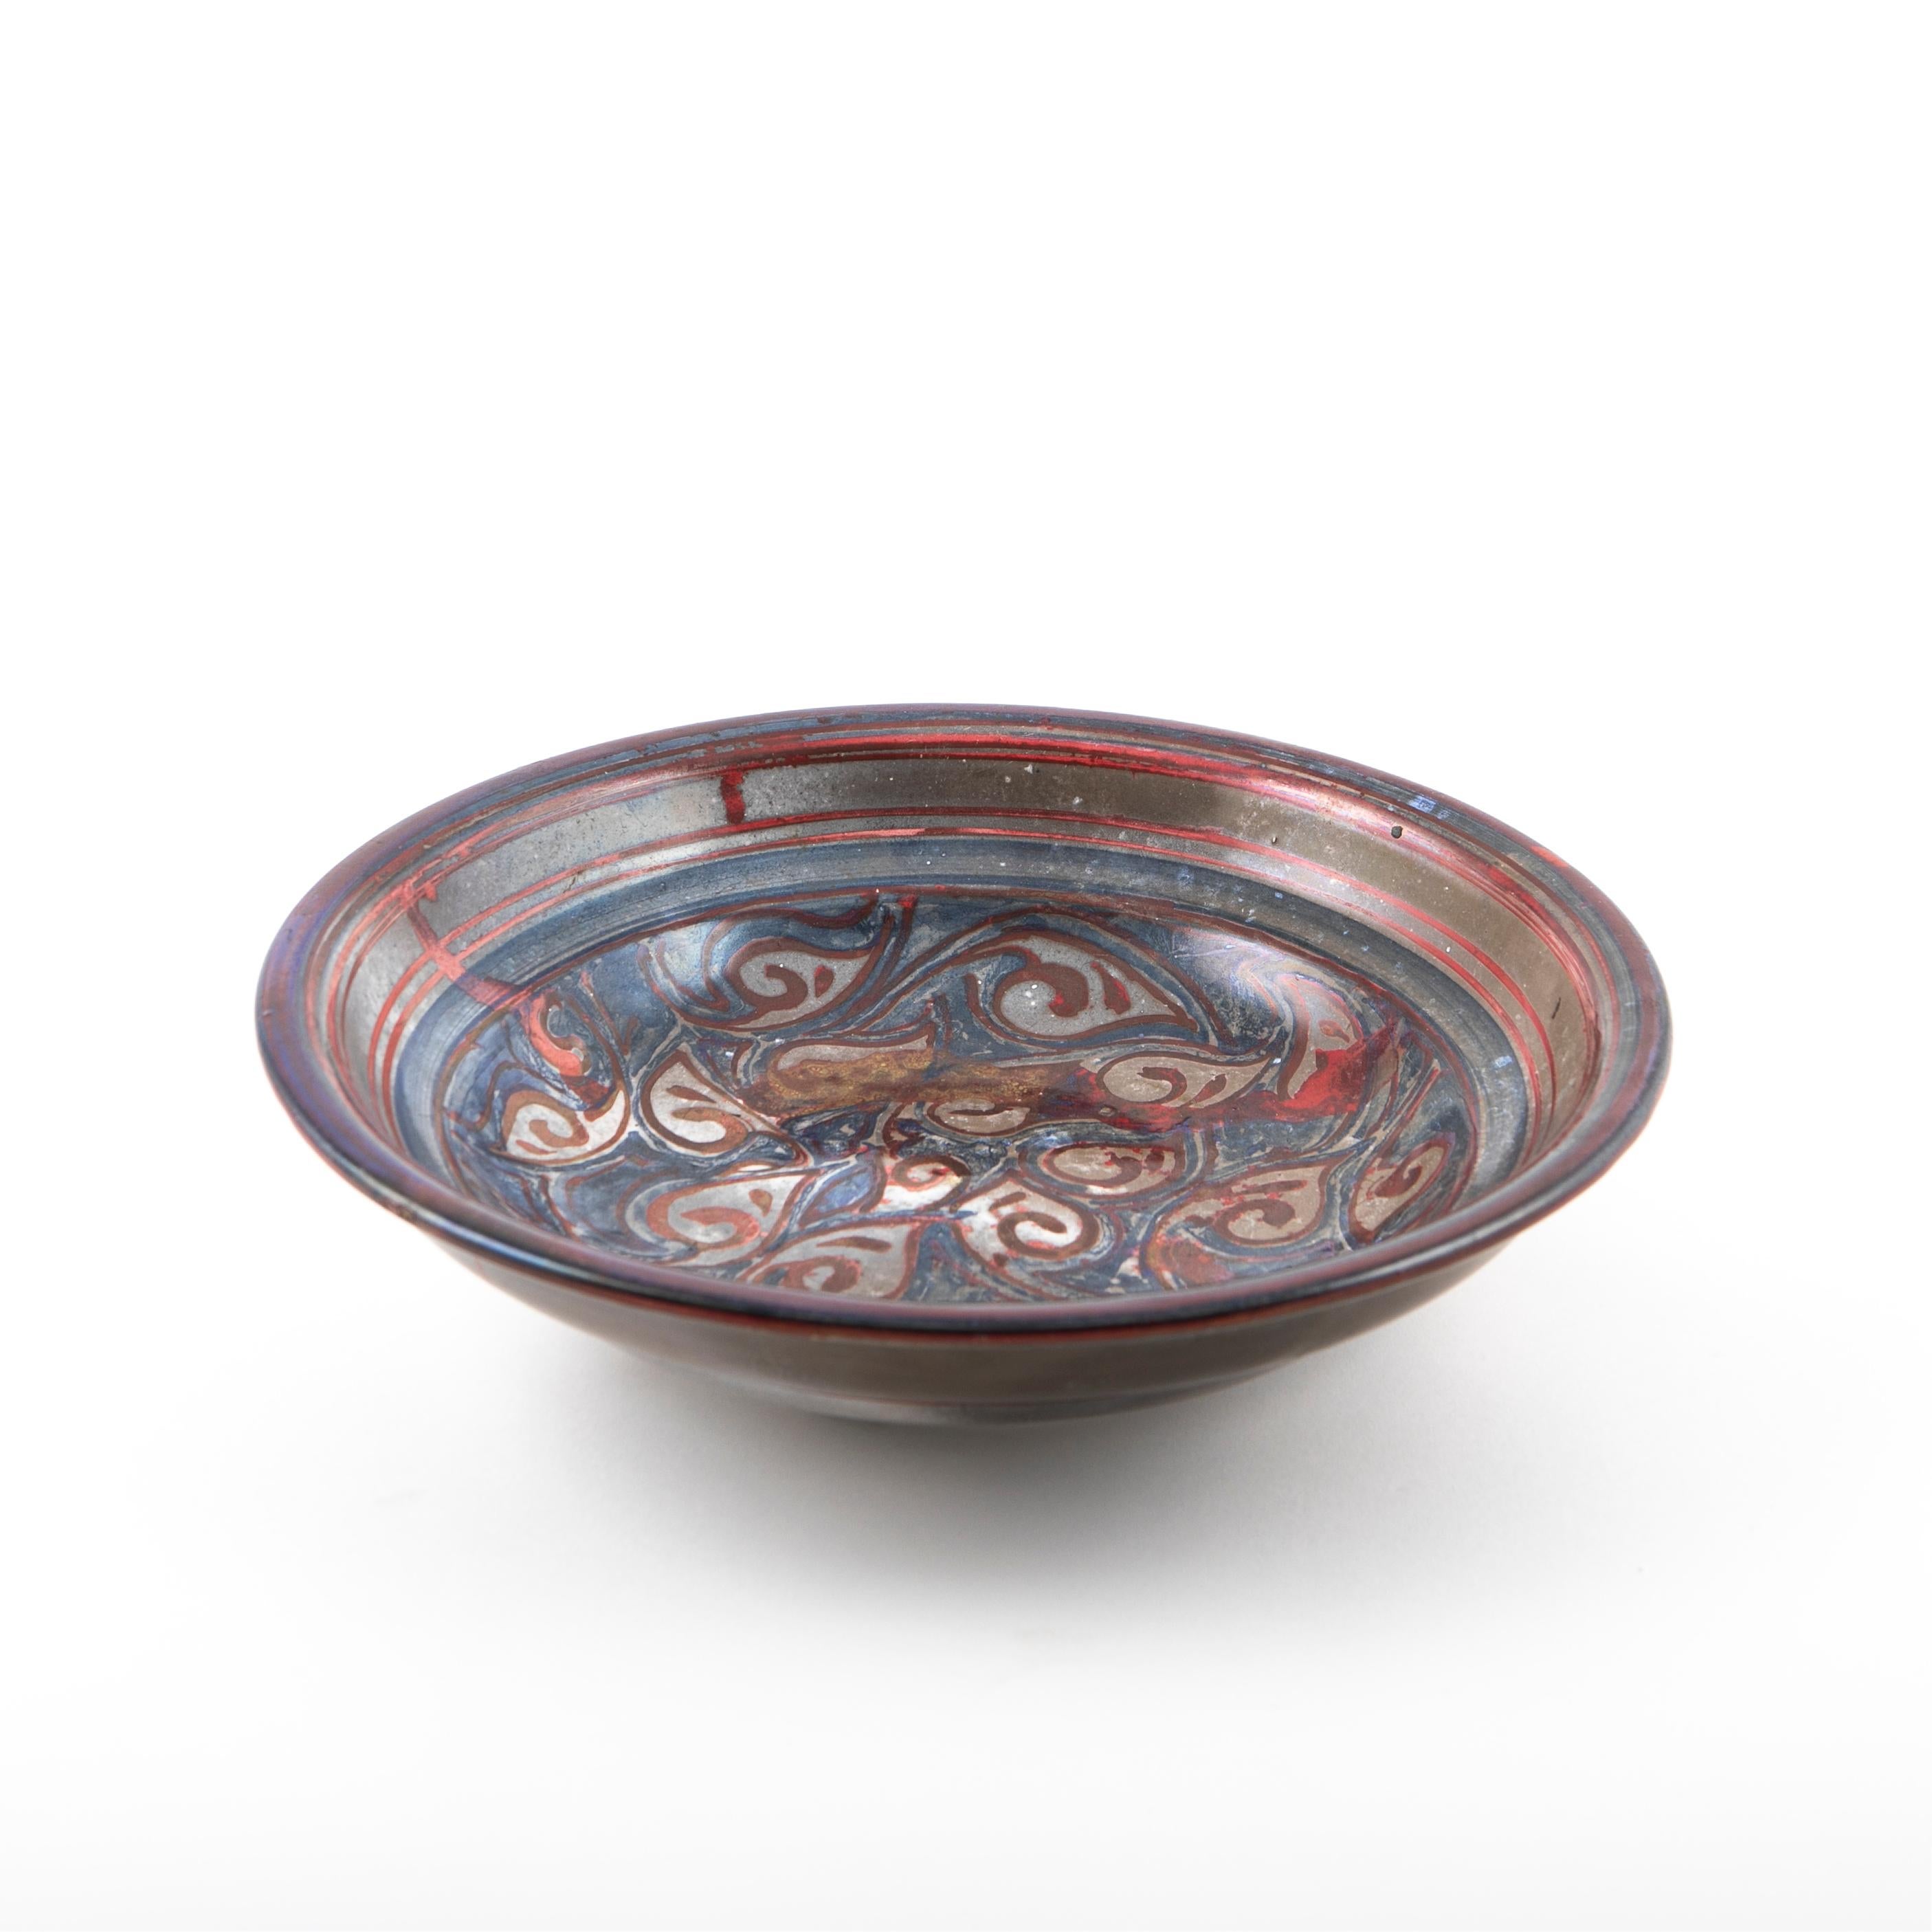 Large Kähler bowl in glazed ceramic.
Dia. 29 cm.
Red and blue shades on a gray base.
The bowl has an incised HAK monogram to the base (Herman A. Kähler).

Perfect condition.

Denmark 1930-1940